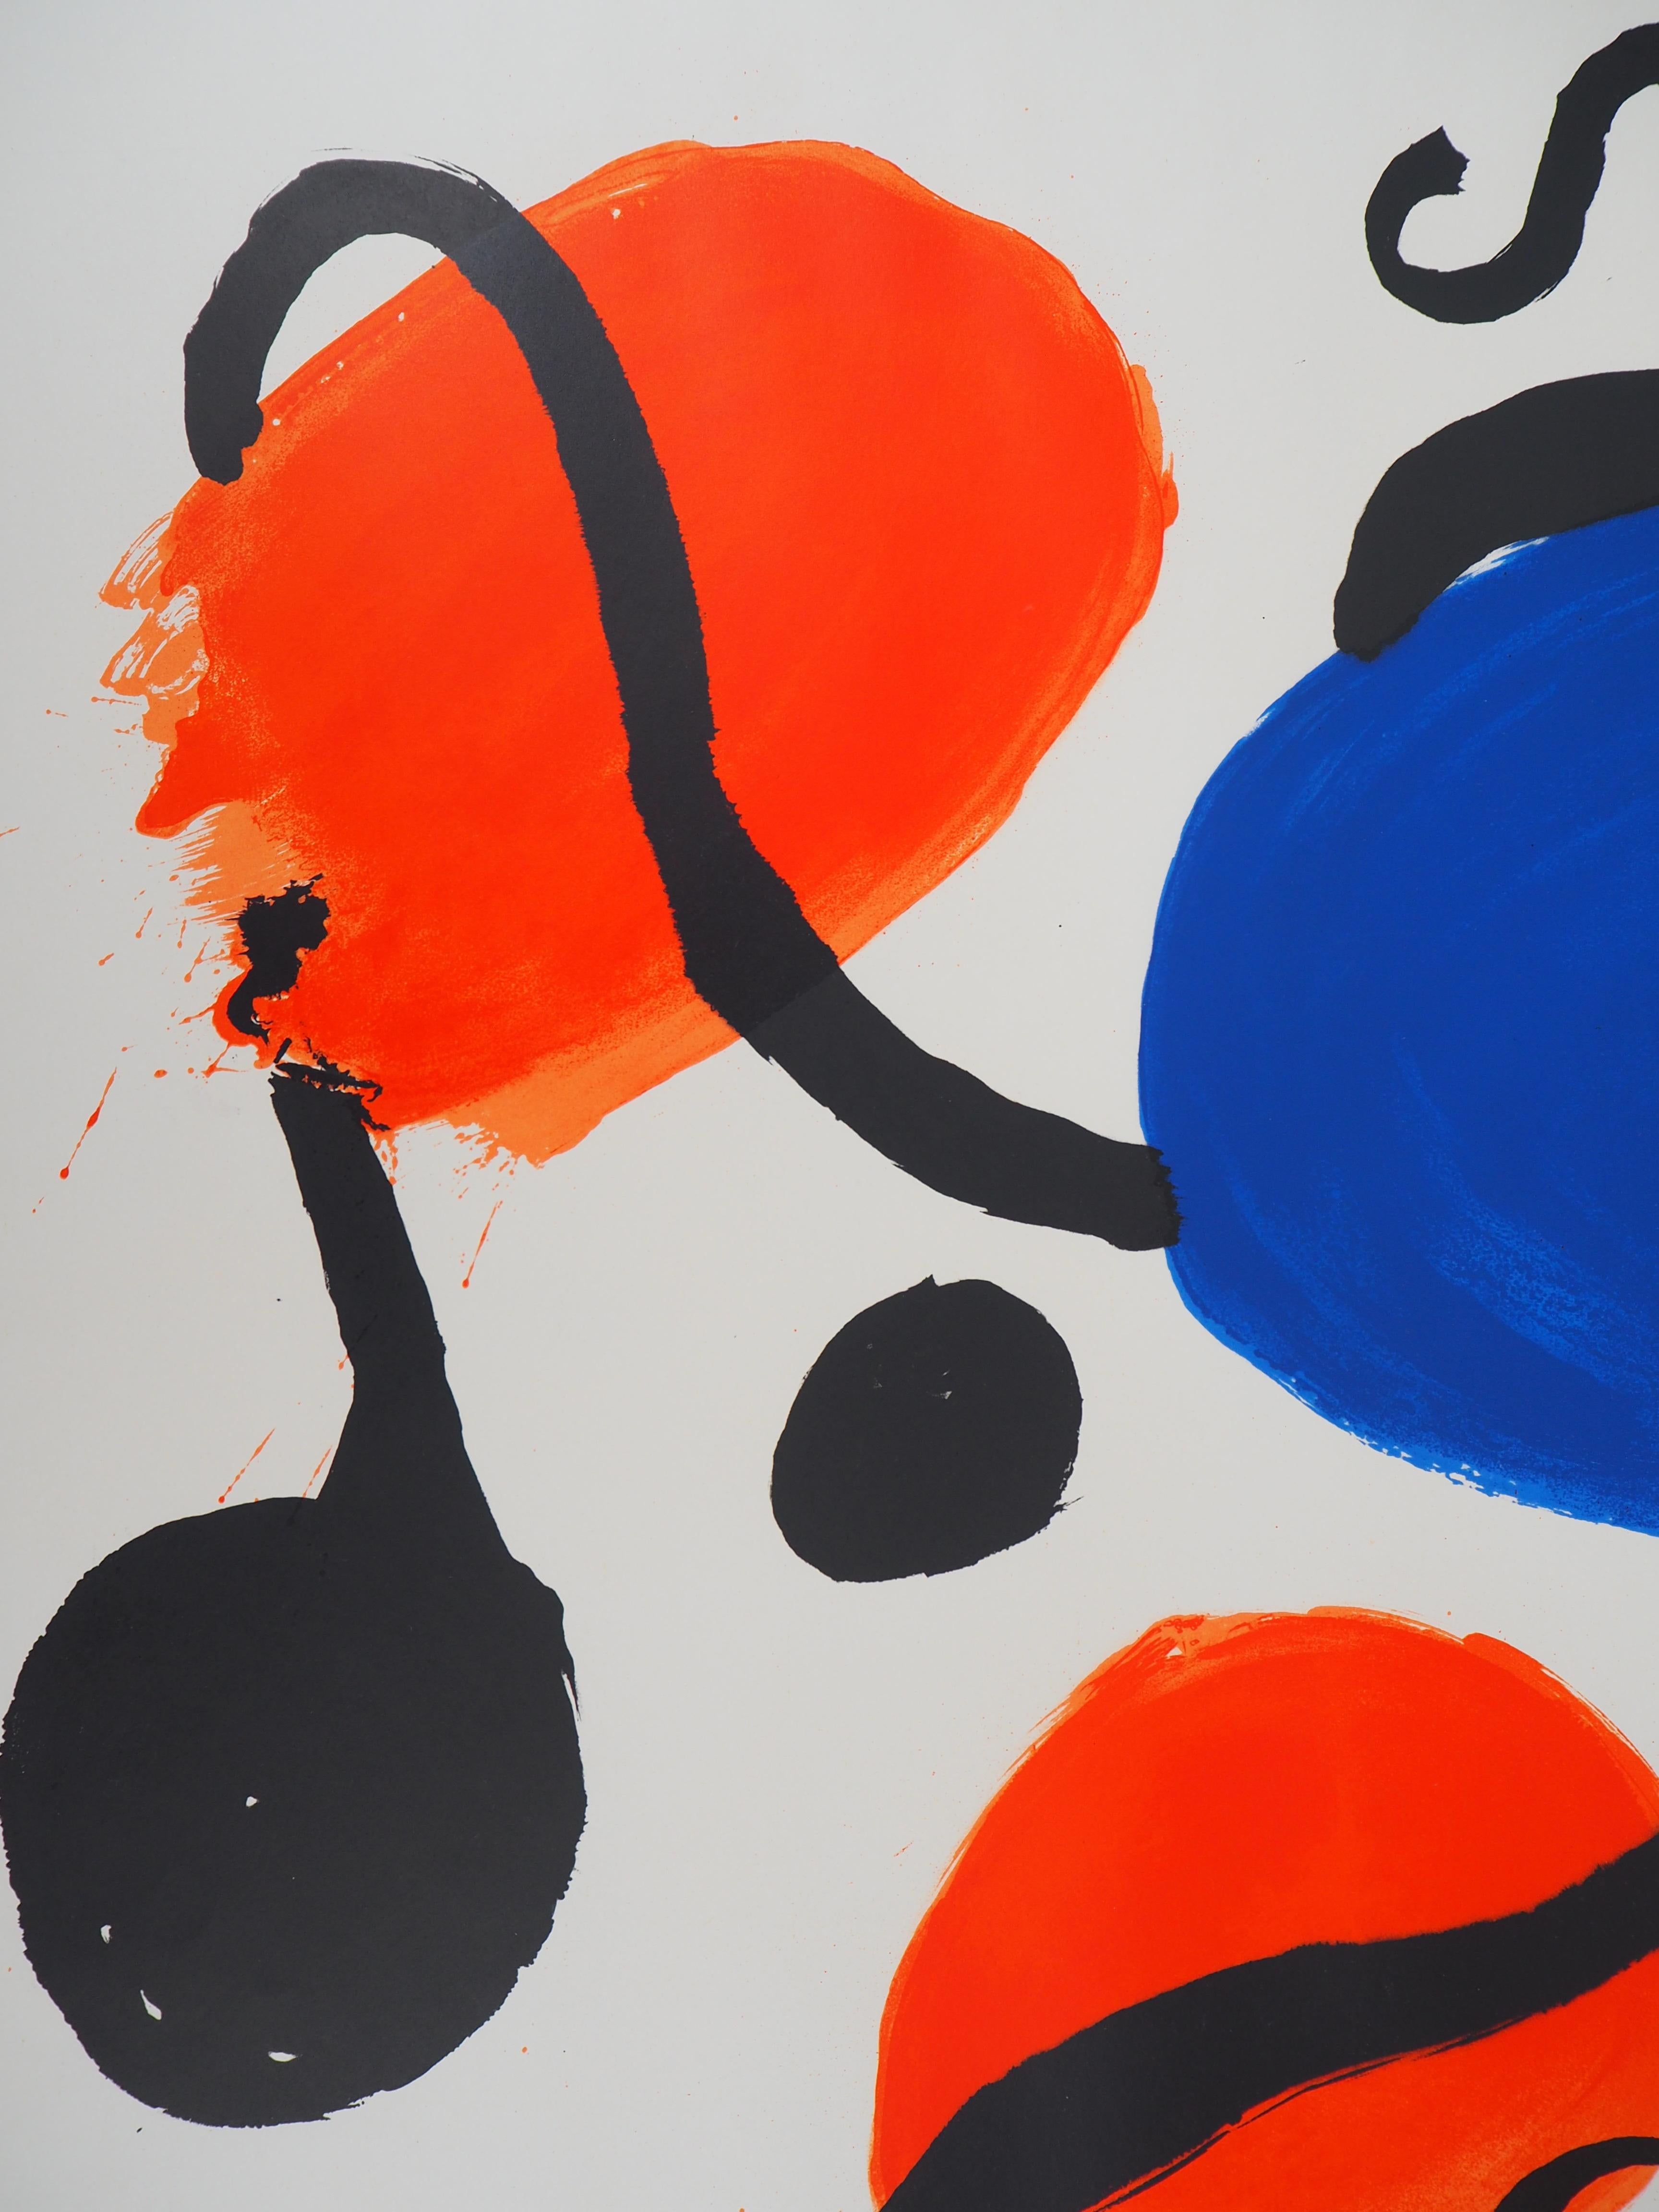 Blue and Red Balloons with Ribbons - Lithograph poster - Mourlot - Abstract Geometric Print by (after) Alexander Calder